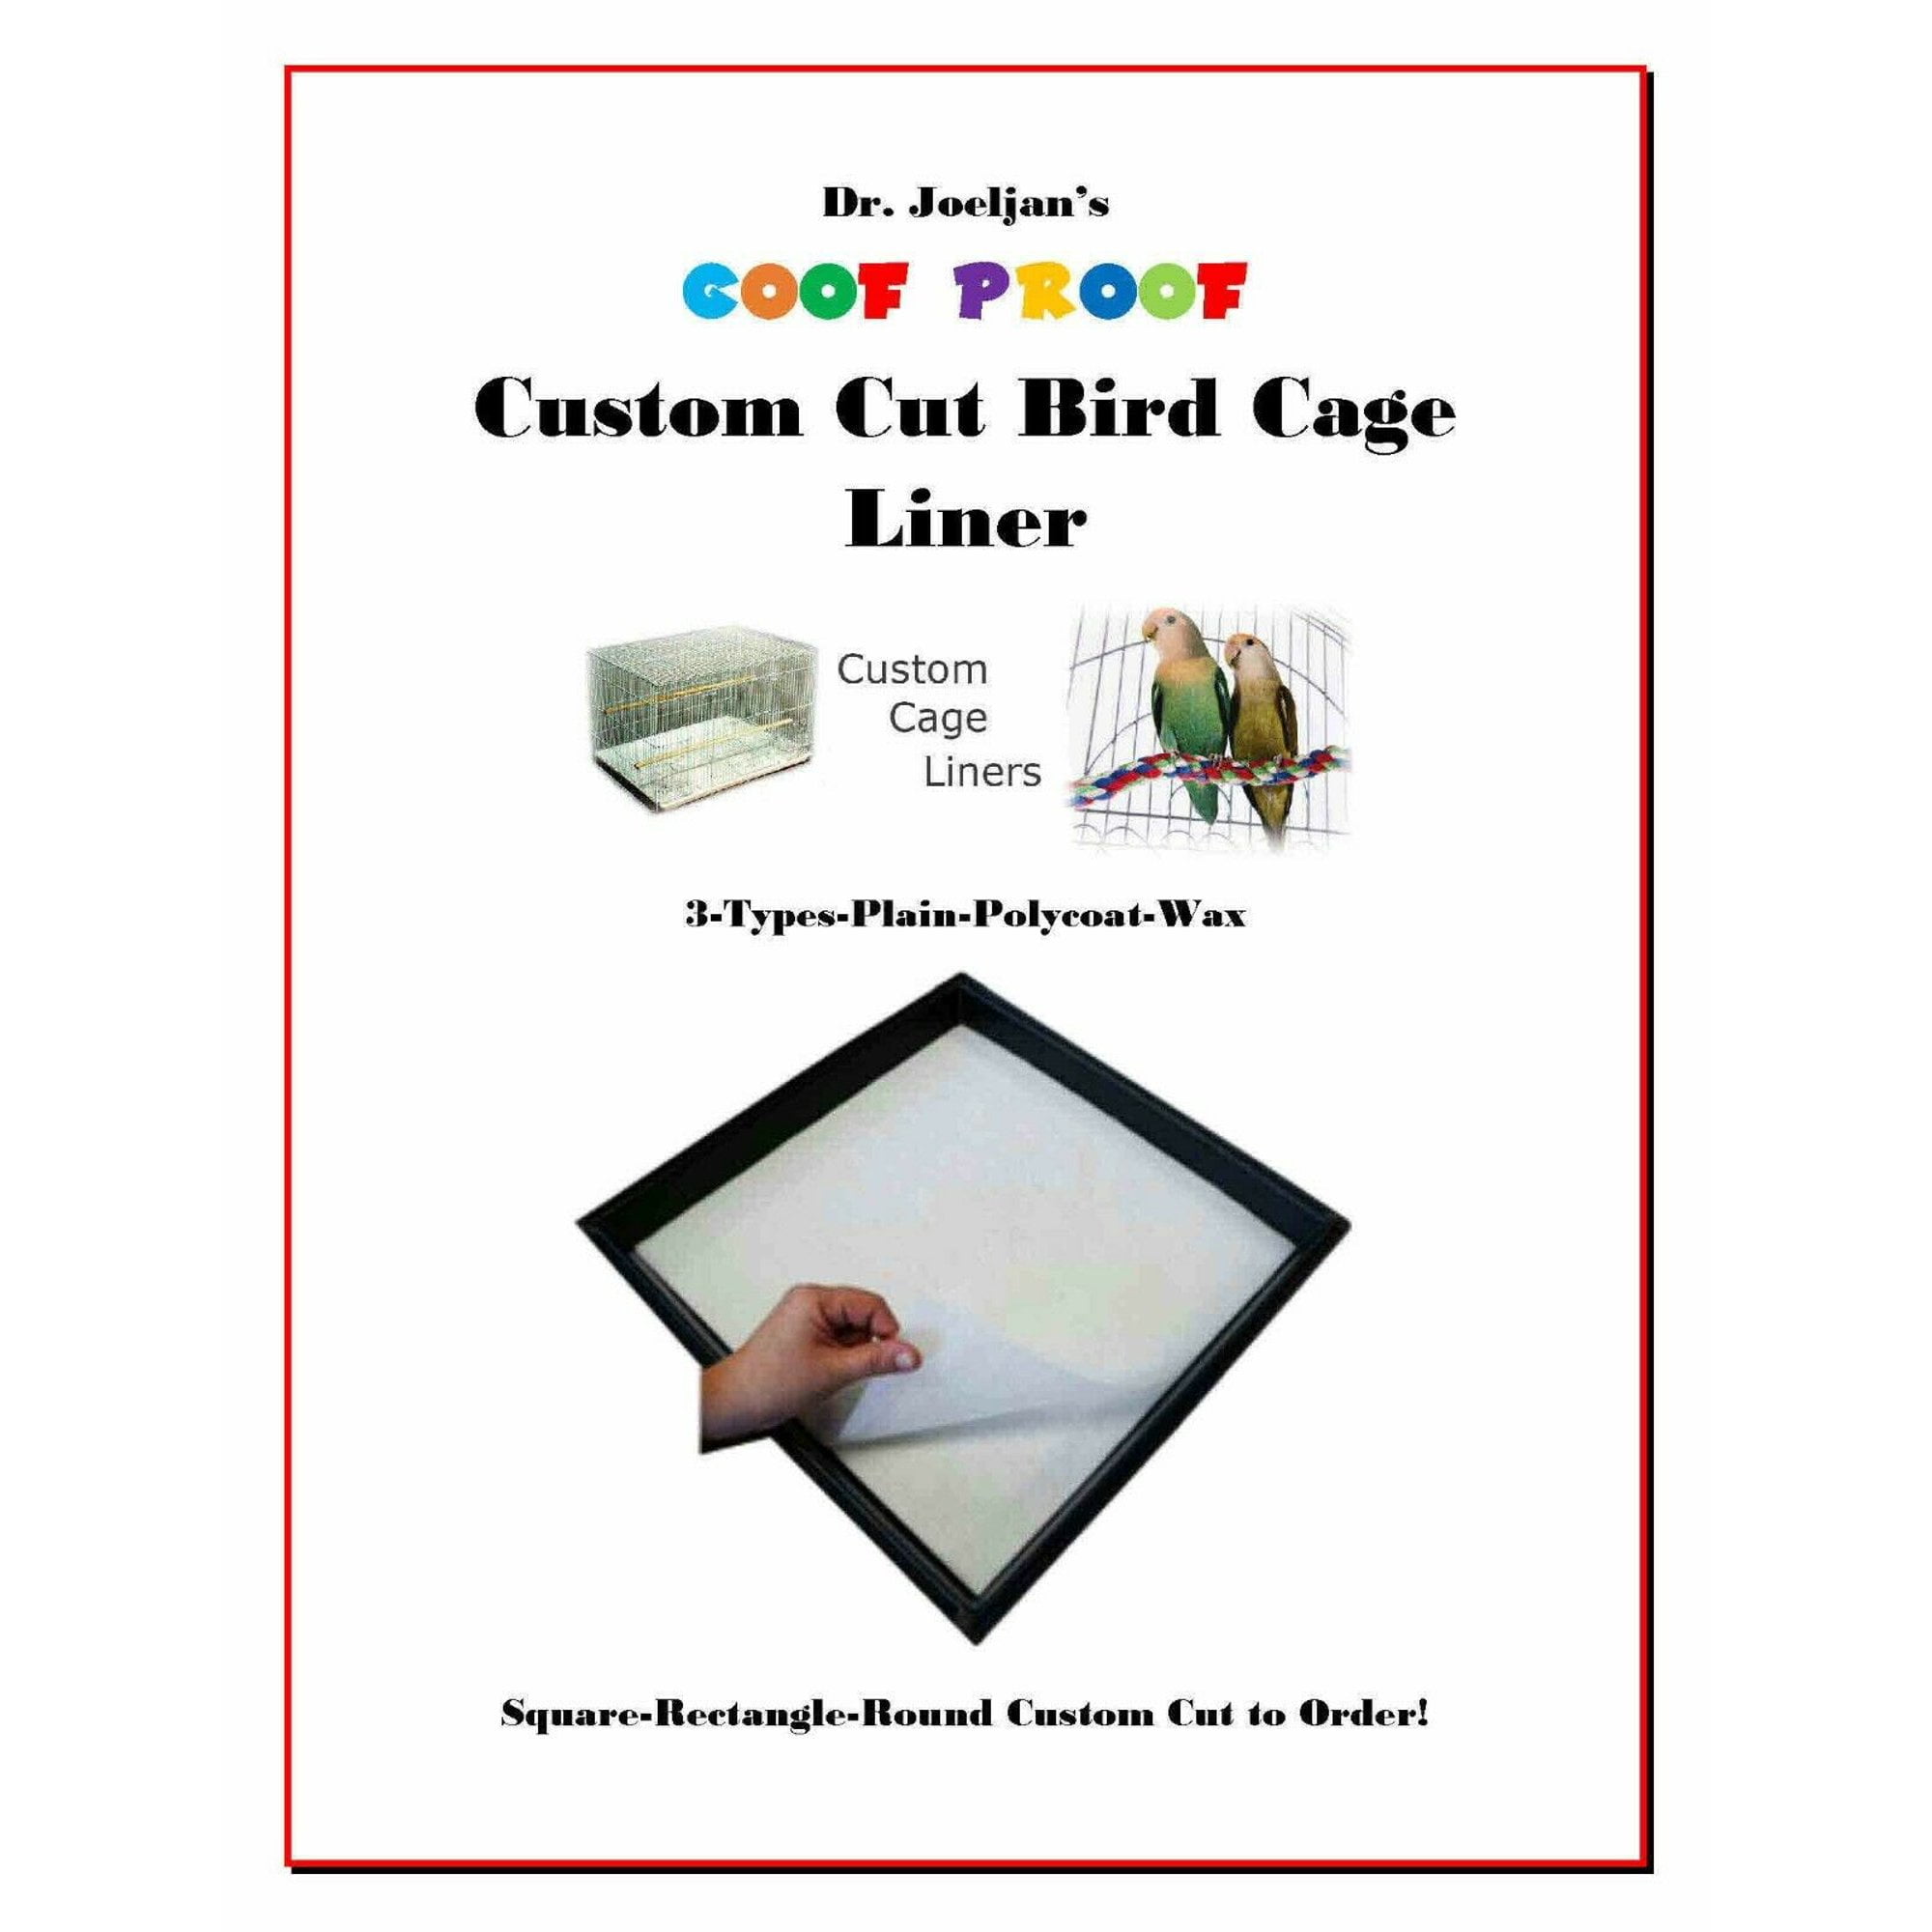 EZ Cage 150 Sheets Custom Cut Bird Cage Liner Pet Cage Liner Choice Round Square Rectangle Plain Paper-Poly Coated-Wax Bird Cage Liner 20lb Wax Round 10 